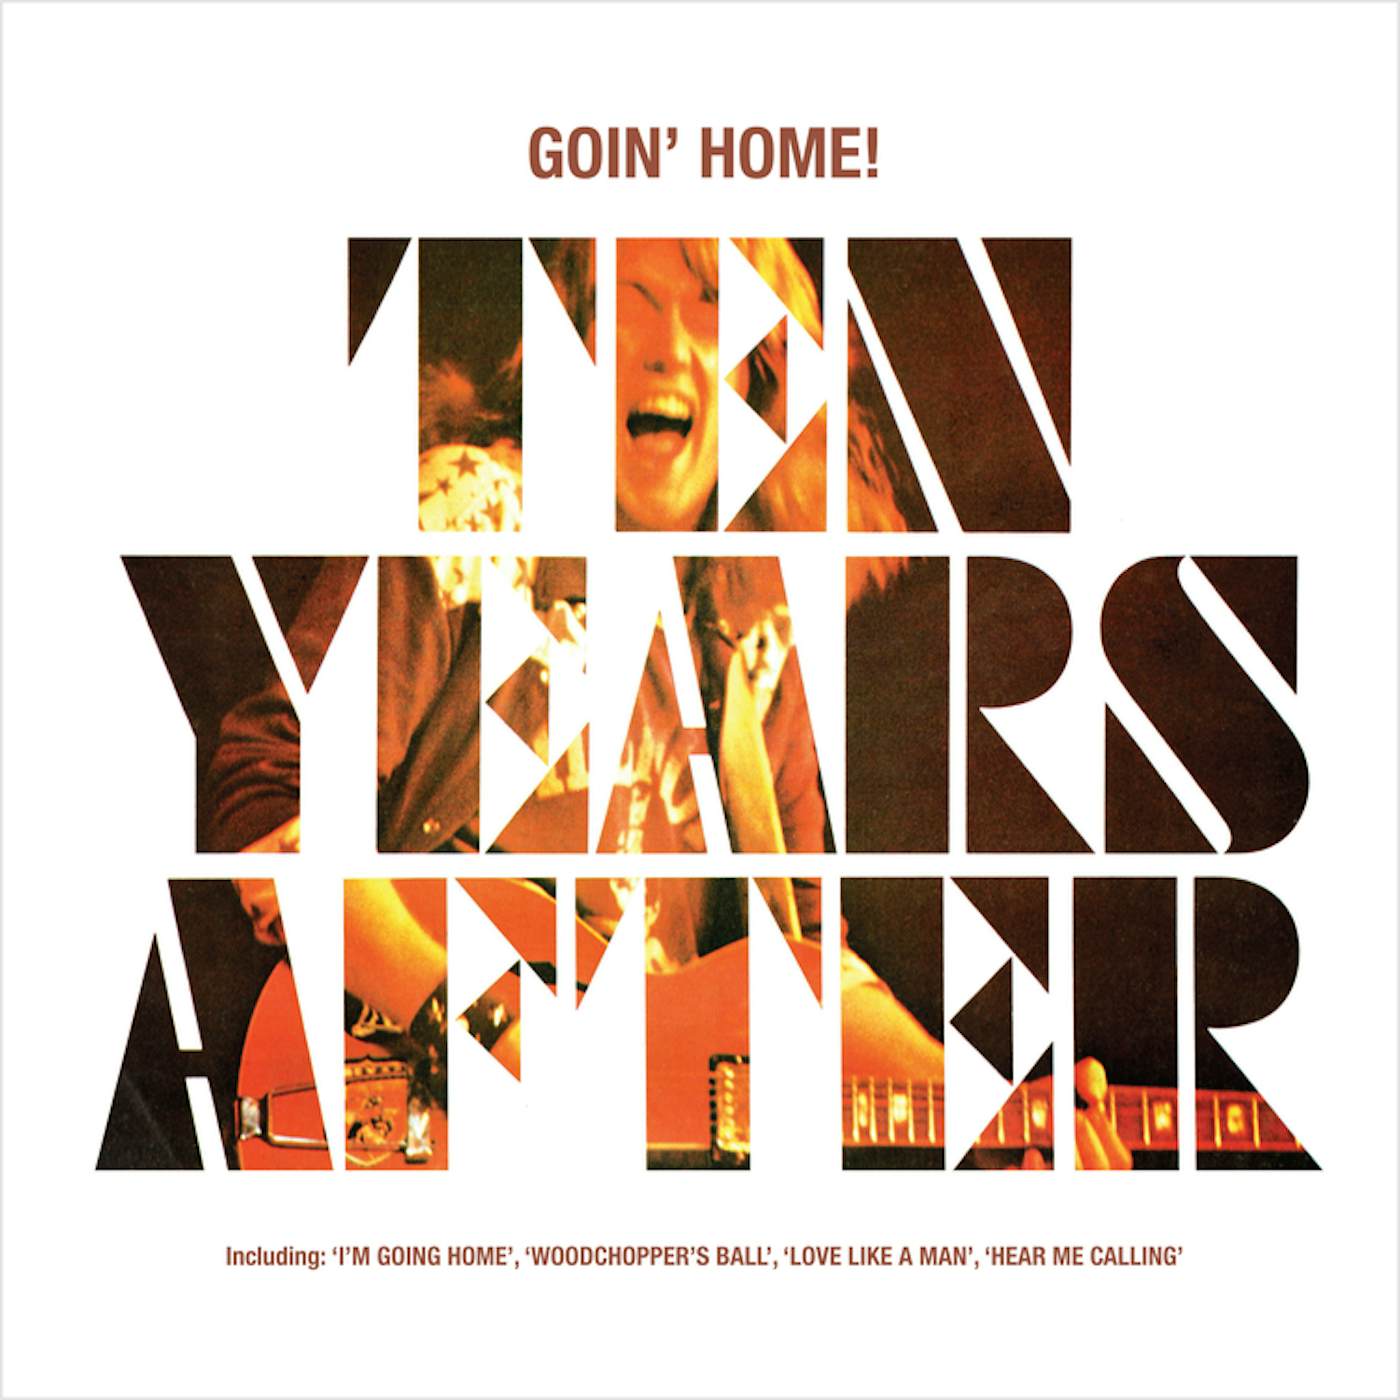 Ten Years After GOIN' HOME CD